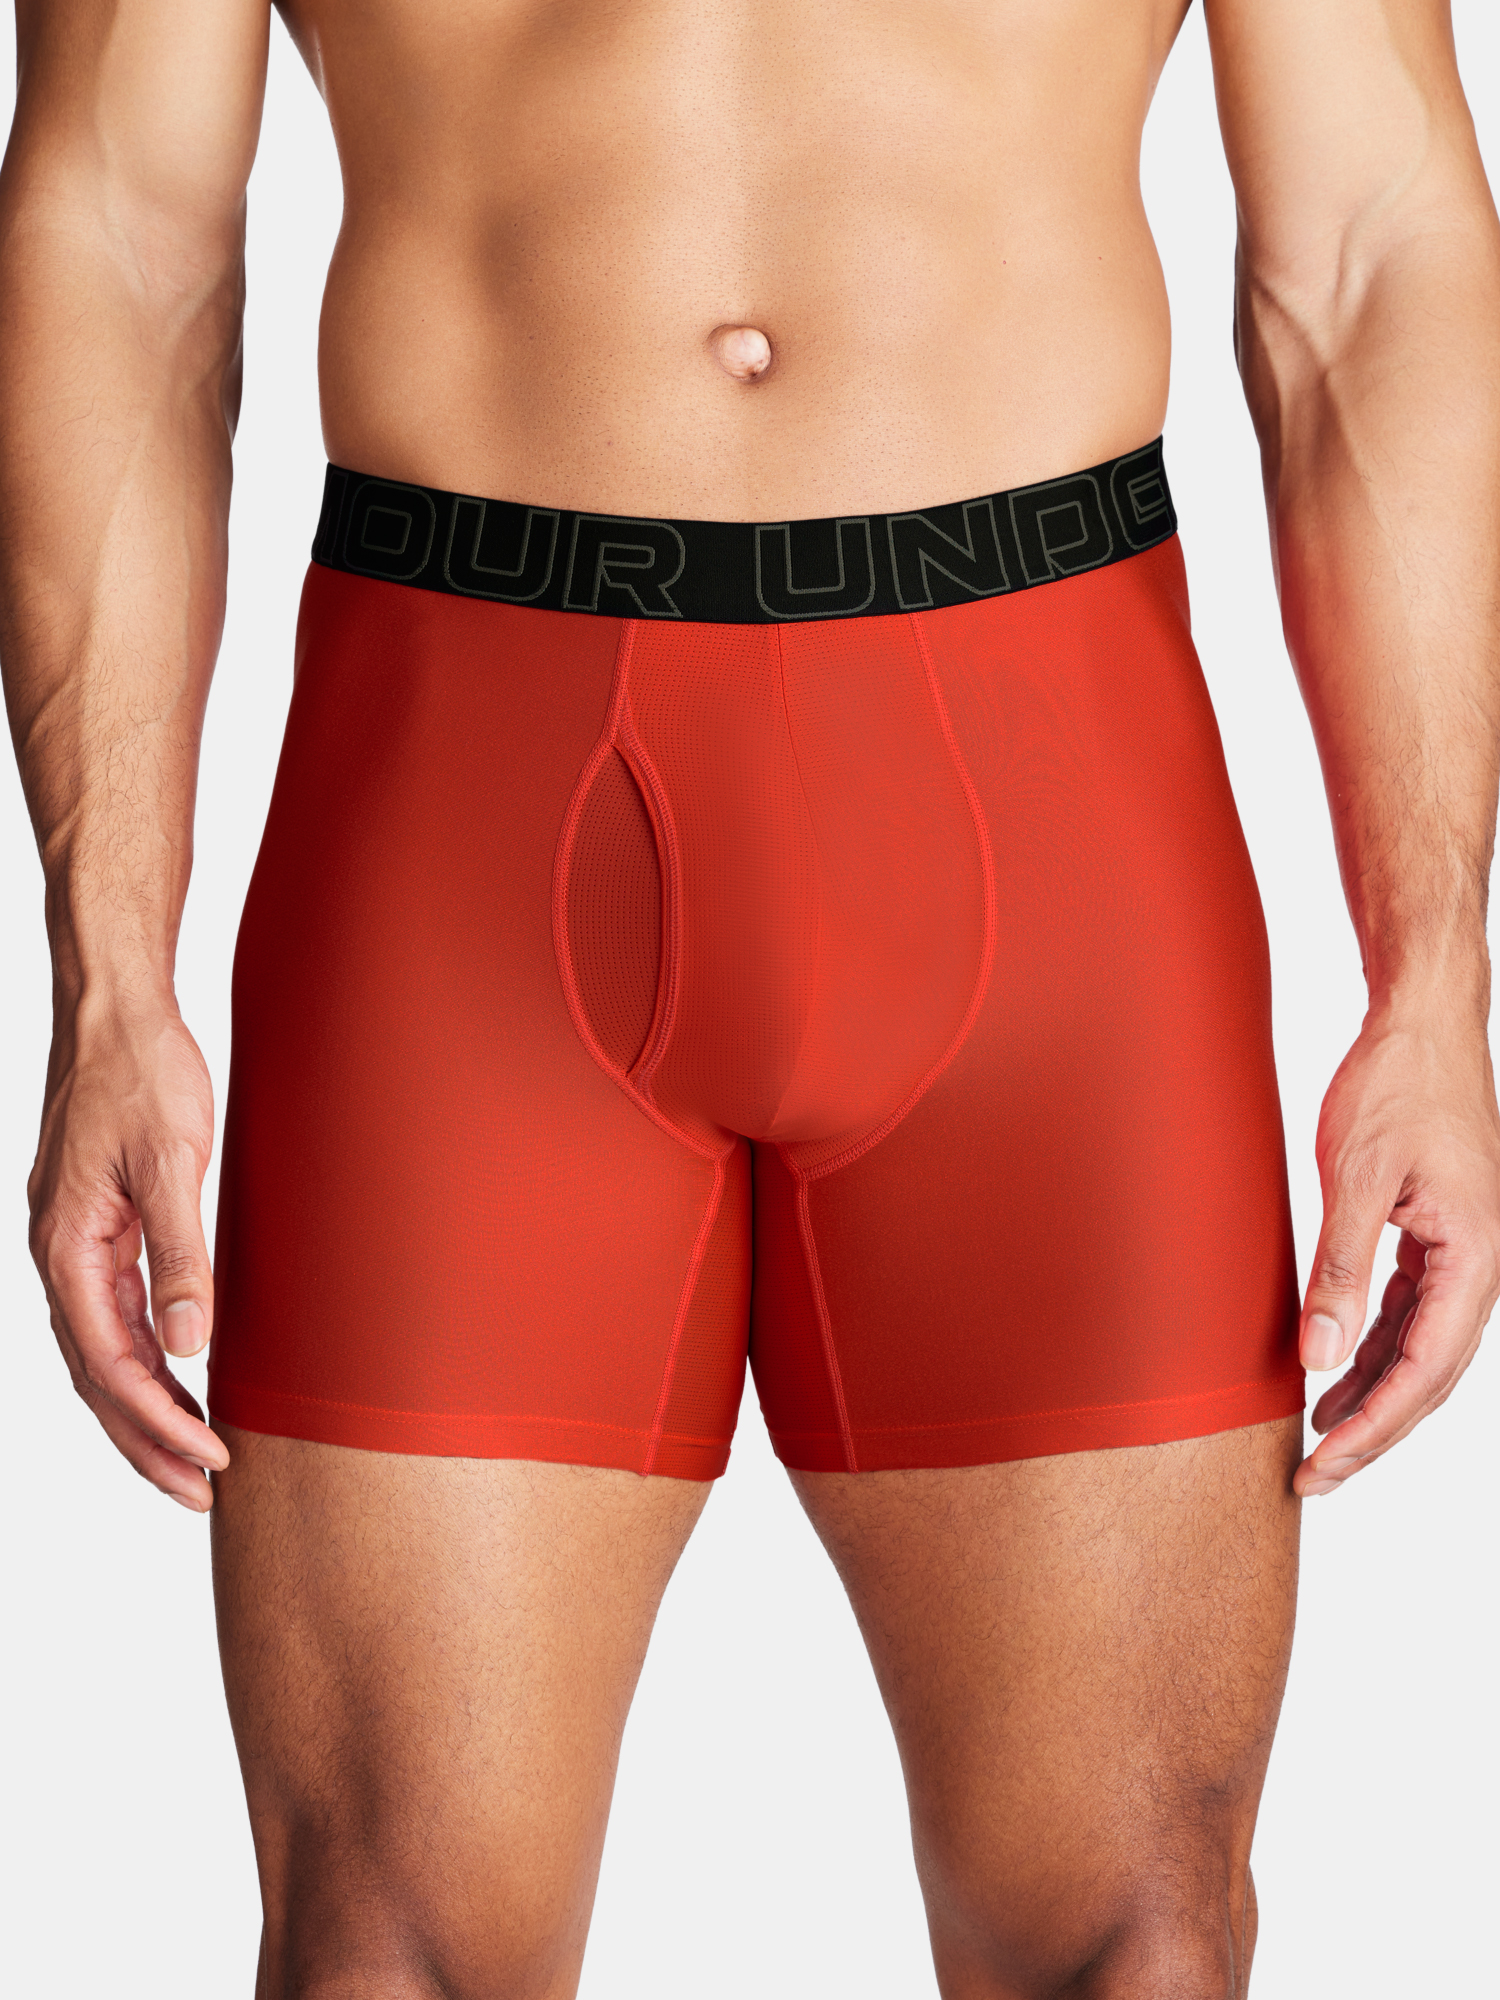 Under Armour Boxer Shorts M UA Perf Tech 6in 1PK-RED - Men